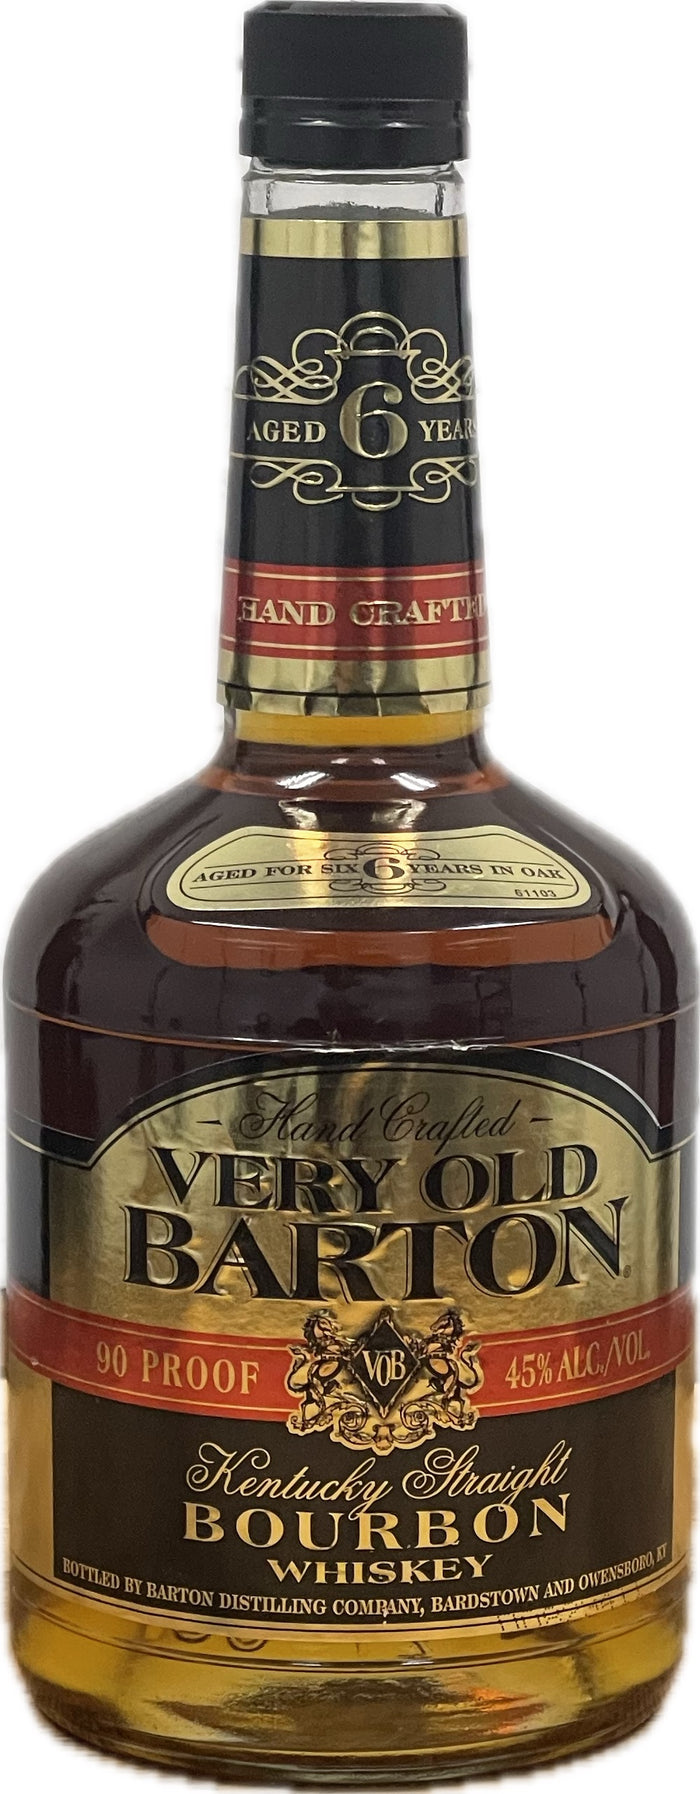 Very Old Barton 6 Year 90 Proof Kentucky Straight Bourbon Whiskey | Signed by Greg Davis